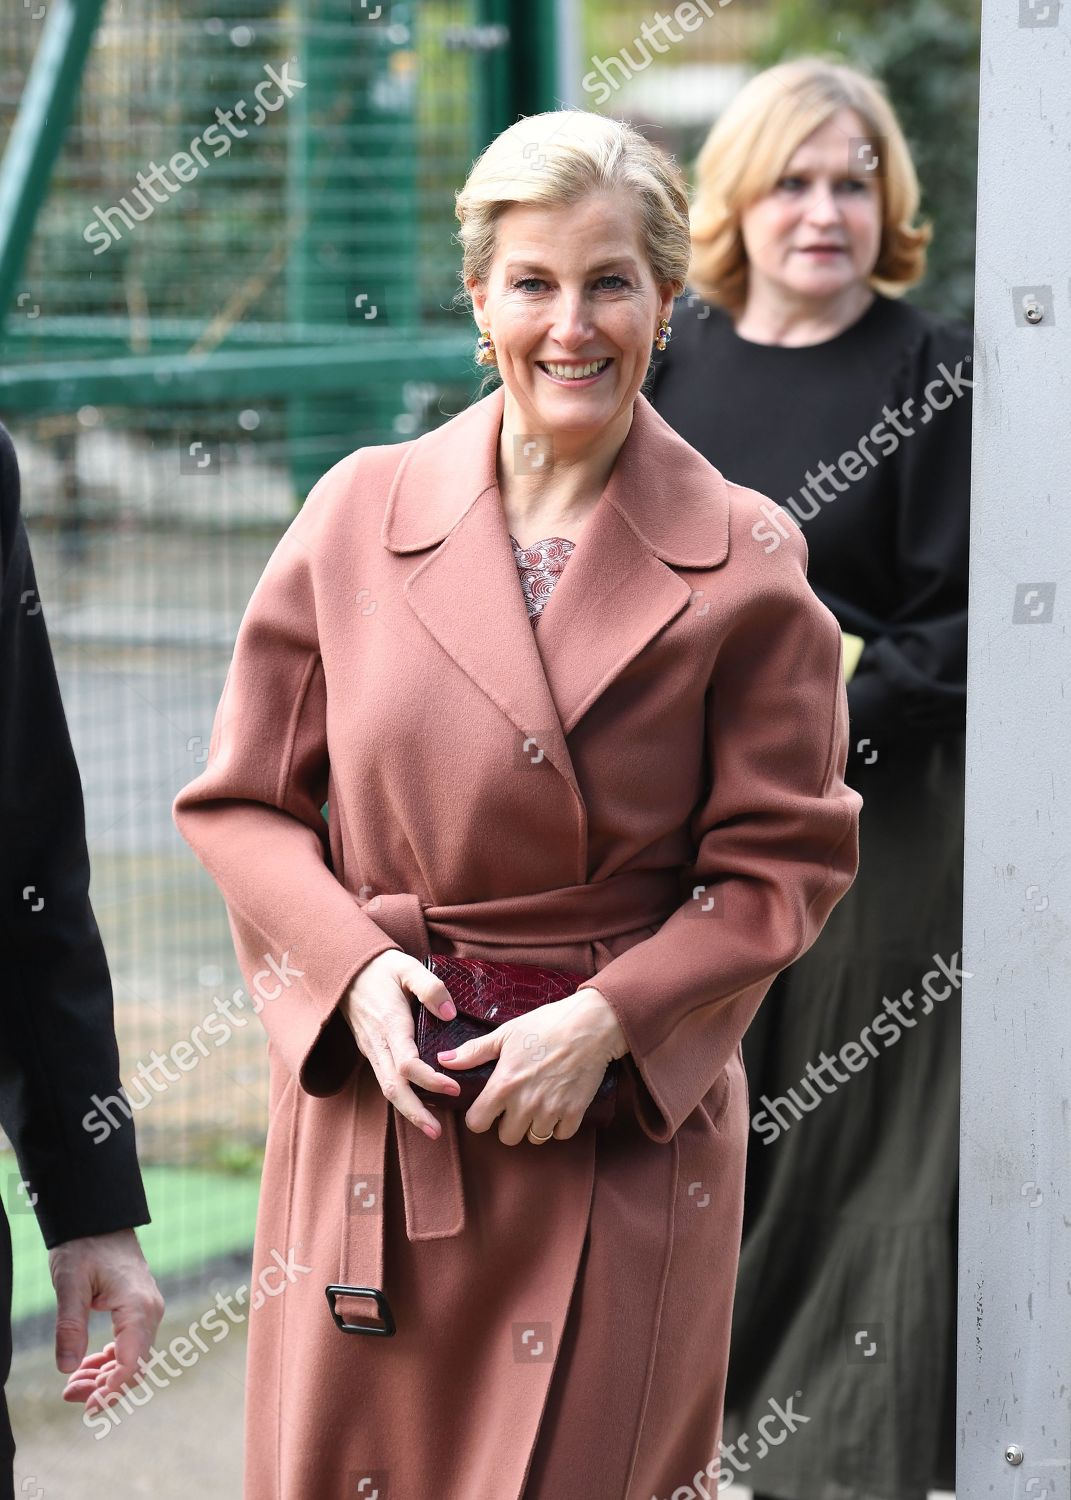 sophie-countess-of-wessex-opens-a-new-studio-for-central-school-of-ballet-london-uk-shutterstock-editorial-10568616e.jpg